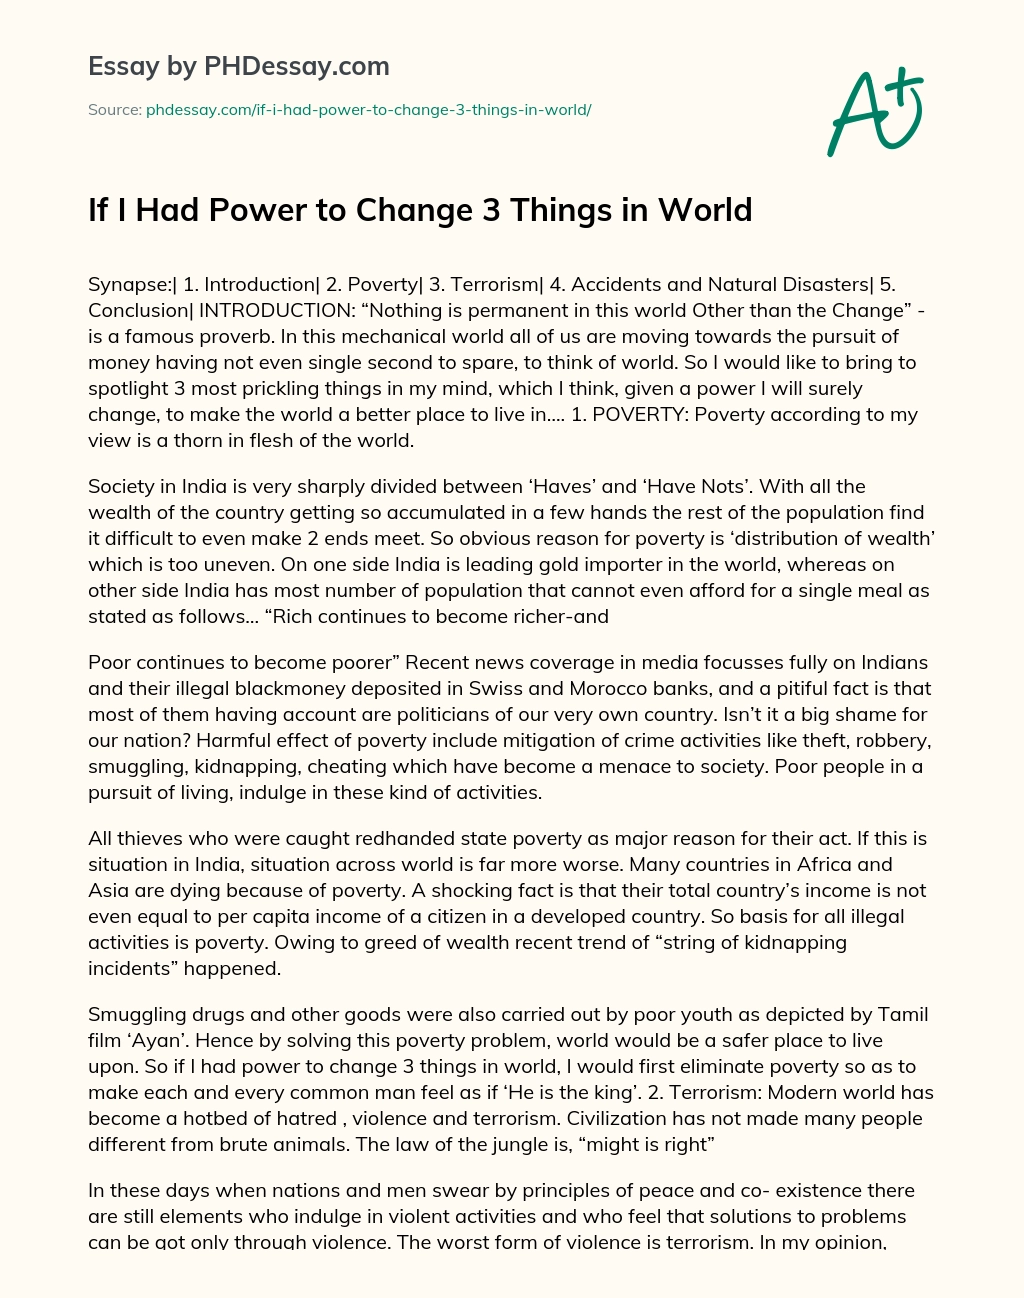 If I Had Power to Change 3 Things in World essay